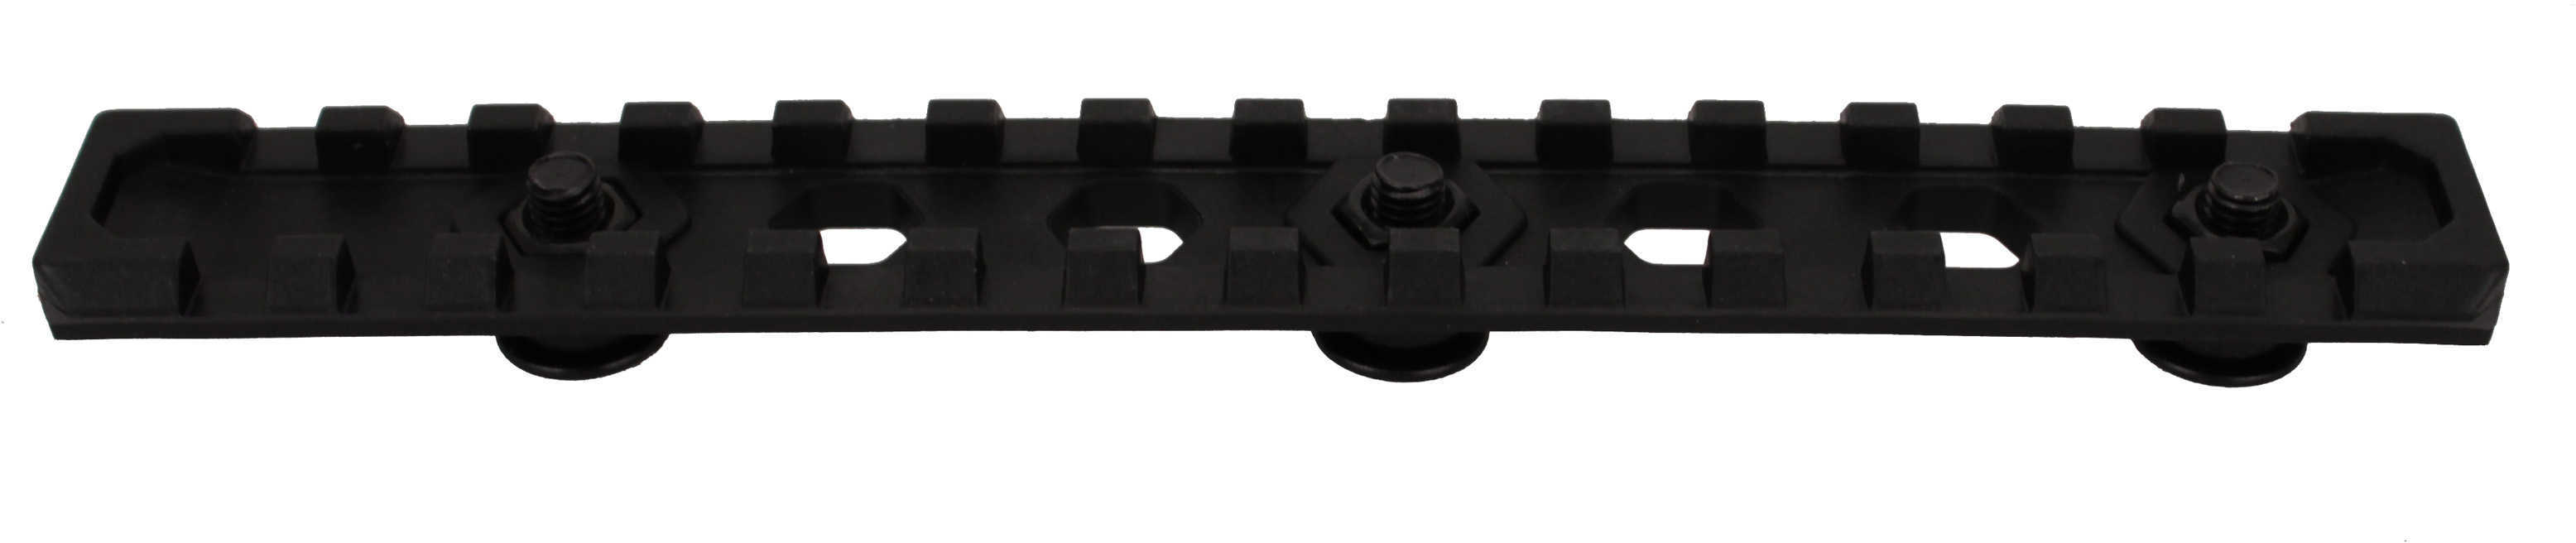 Promag AR-15 Rifle & M4 Carbine Forend Rail - Black Picatinny Attaches To The using 3 screws Allowing